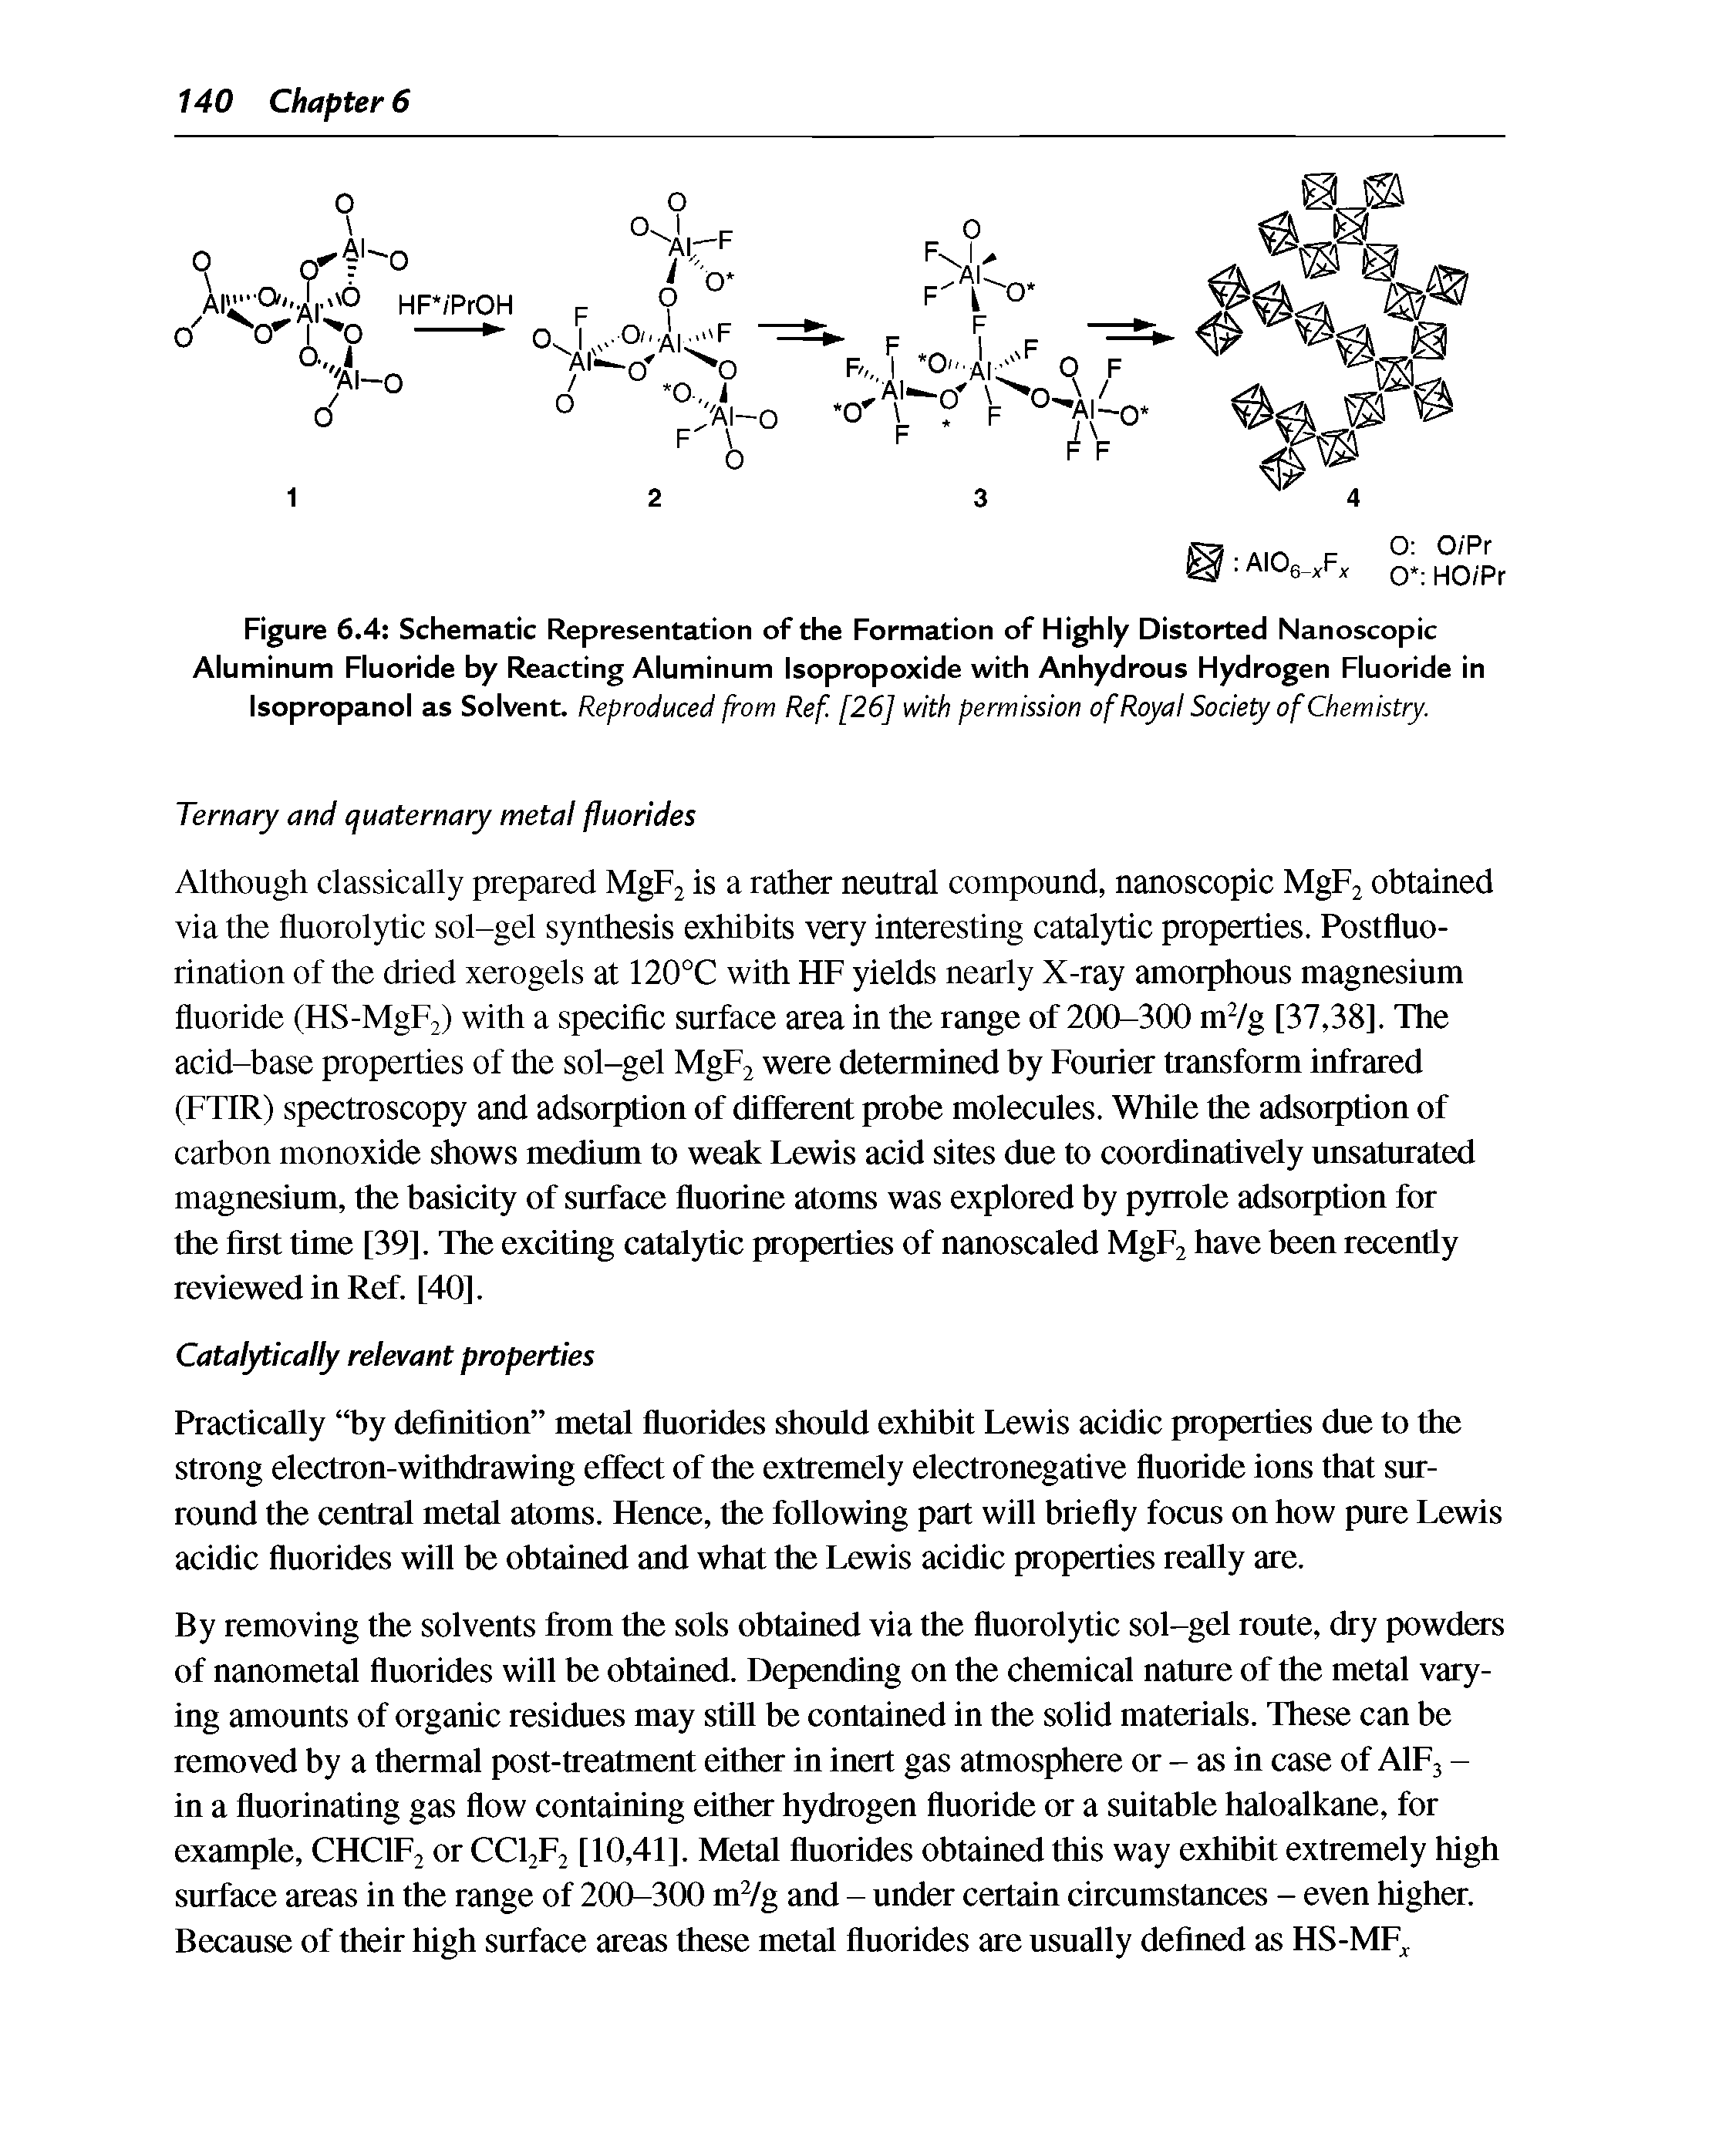 Figure 6.4 Schematic Representation of the Formation of Highly Distorted Nanoscopic Aluminum Fluoride by Reacting Aluminum Isopropoxide with Anhydrous Hydrogen Fluoride in Isopropanol as Solvent. Reproduced from Ref. [26] with permission of Royal Society of Chemistry.